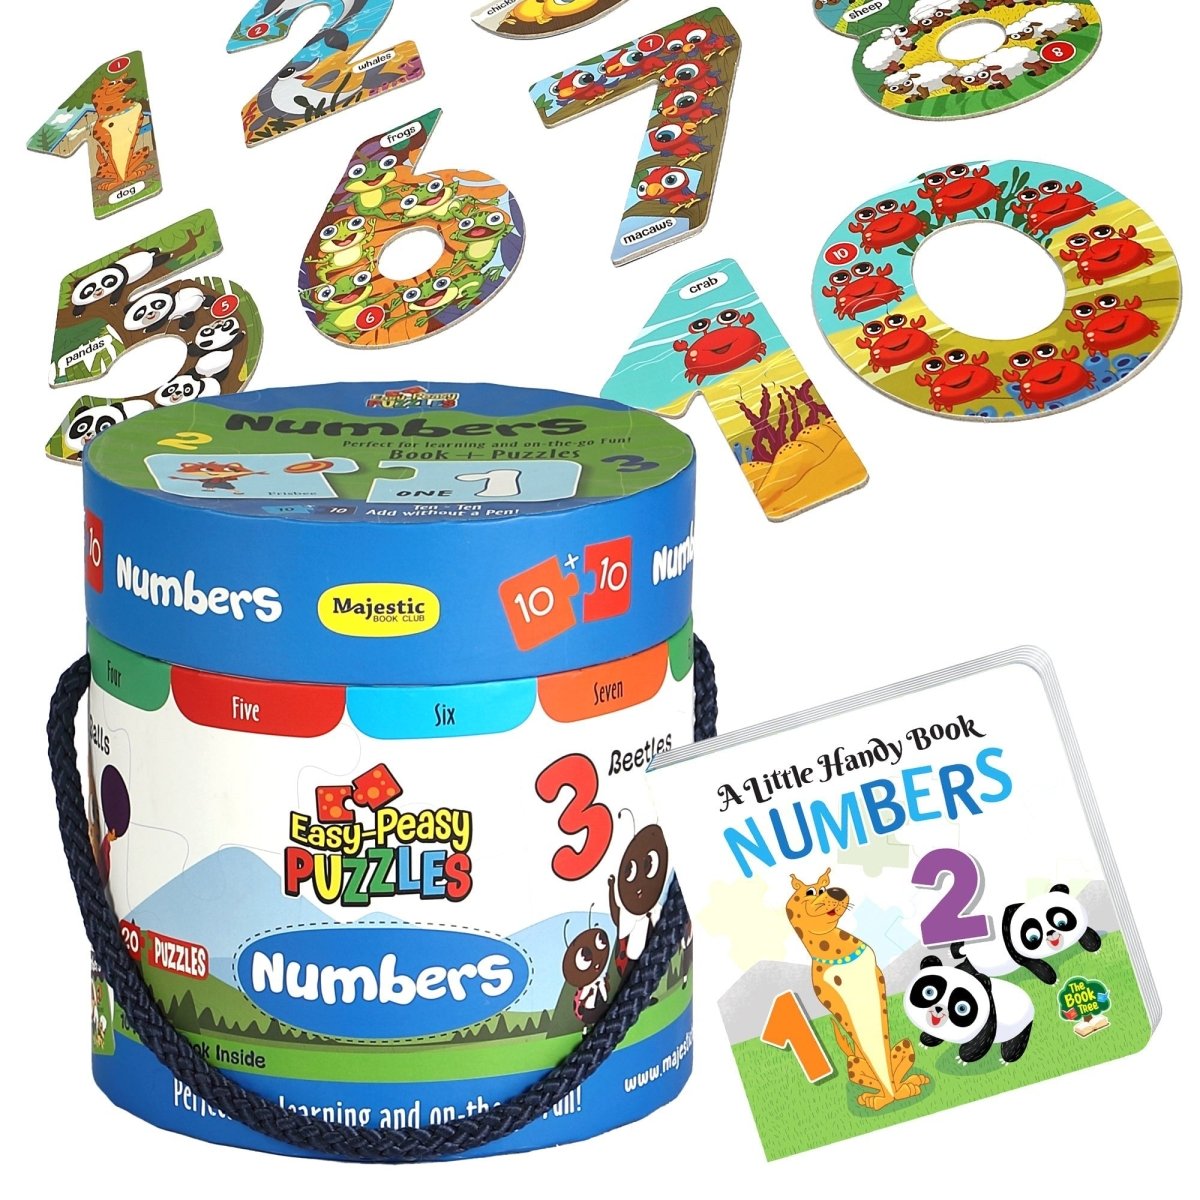 Majestic Book Club NUMBERS-EASY PEASY PUZZLE - 3598216